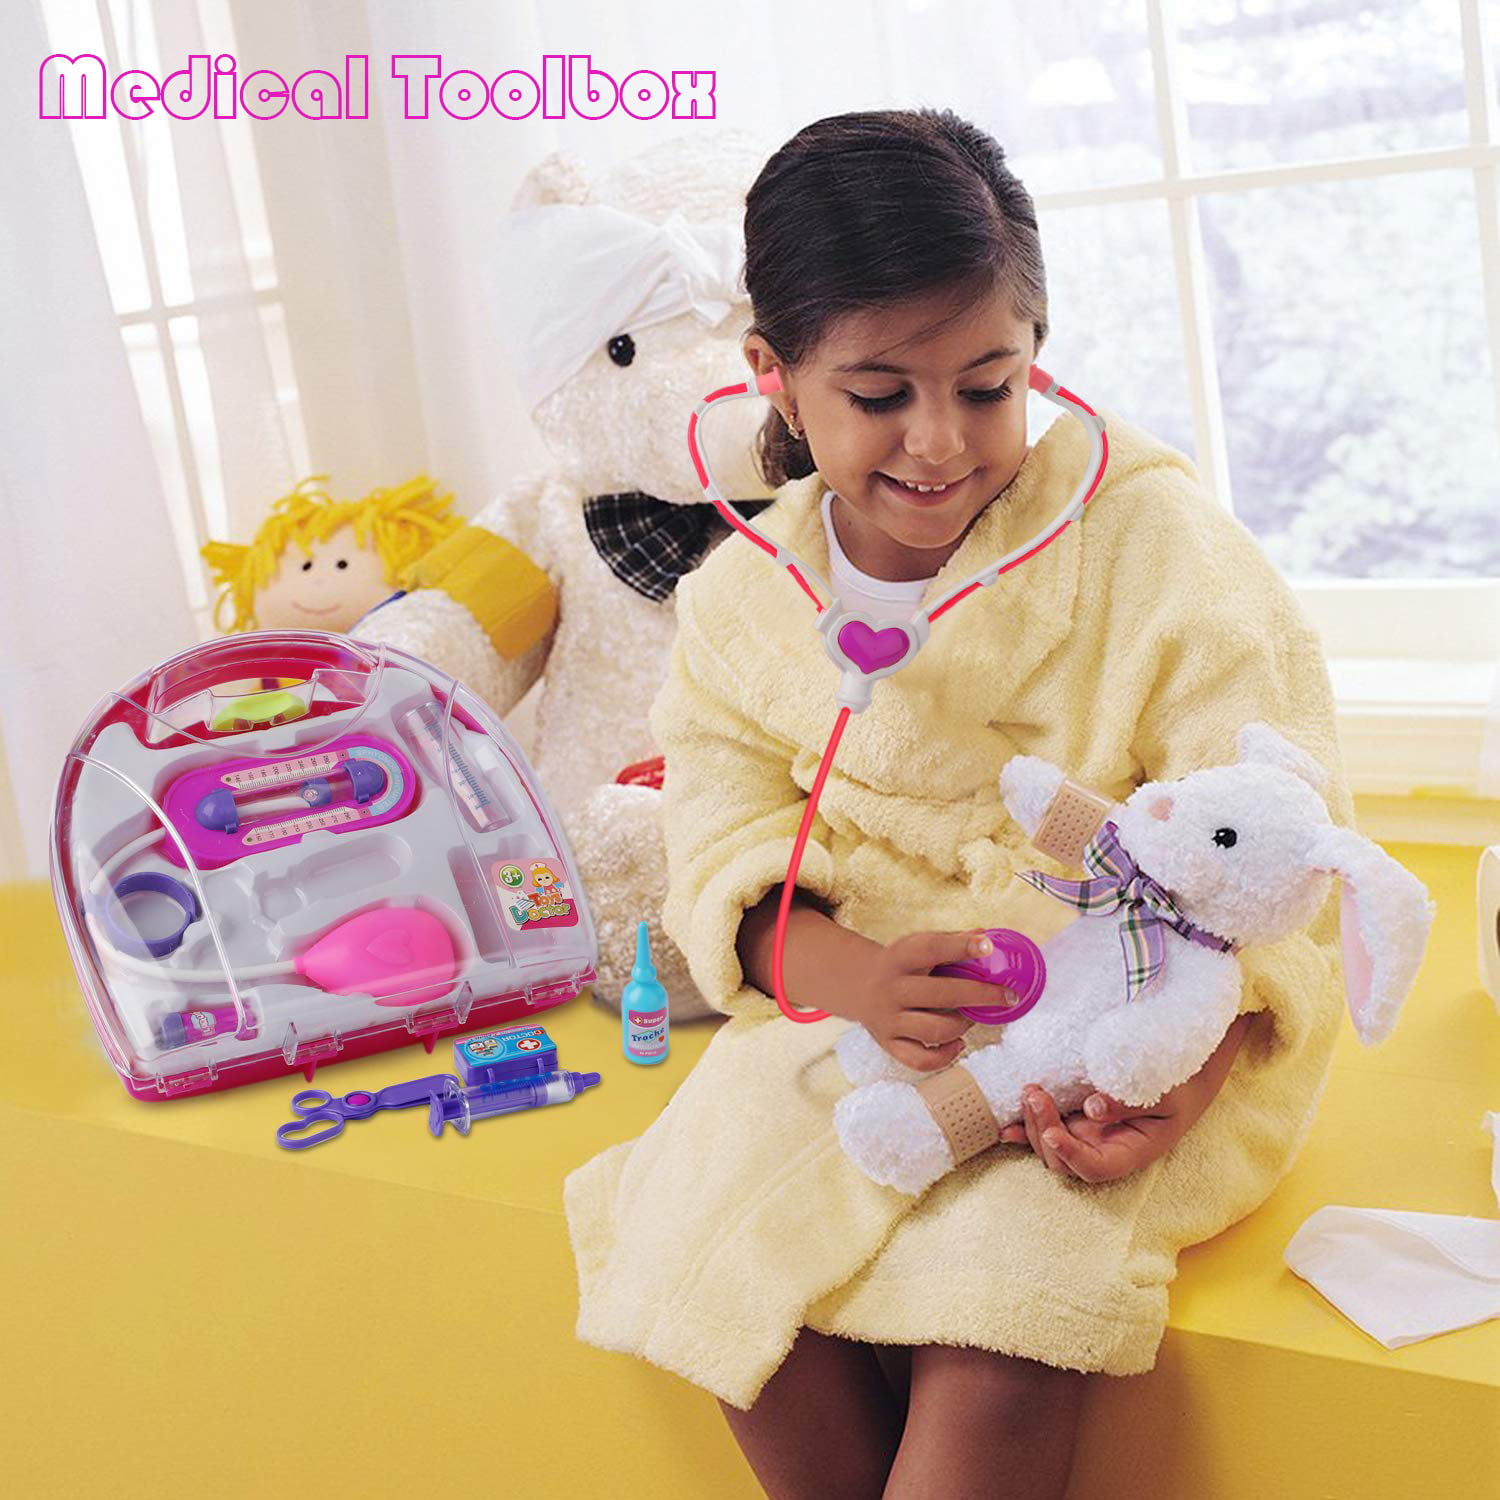 Doctors Suit Small Childrens Toys Nurse Injection Tool Christmas Gifts,White,Suit Kids Play Kitchen Set Ducational Children